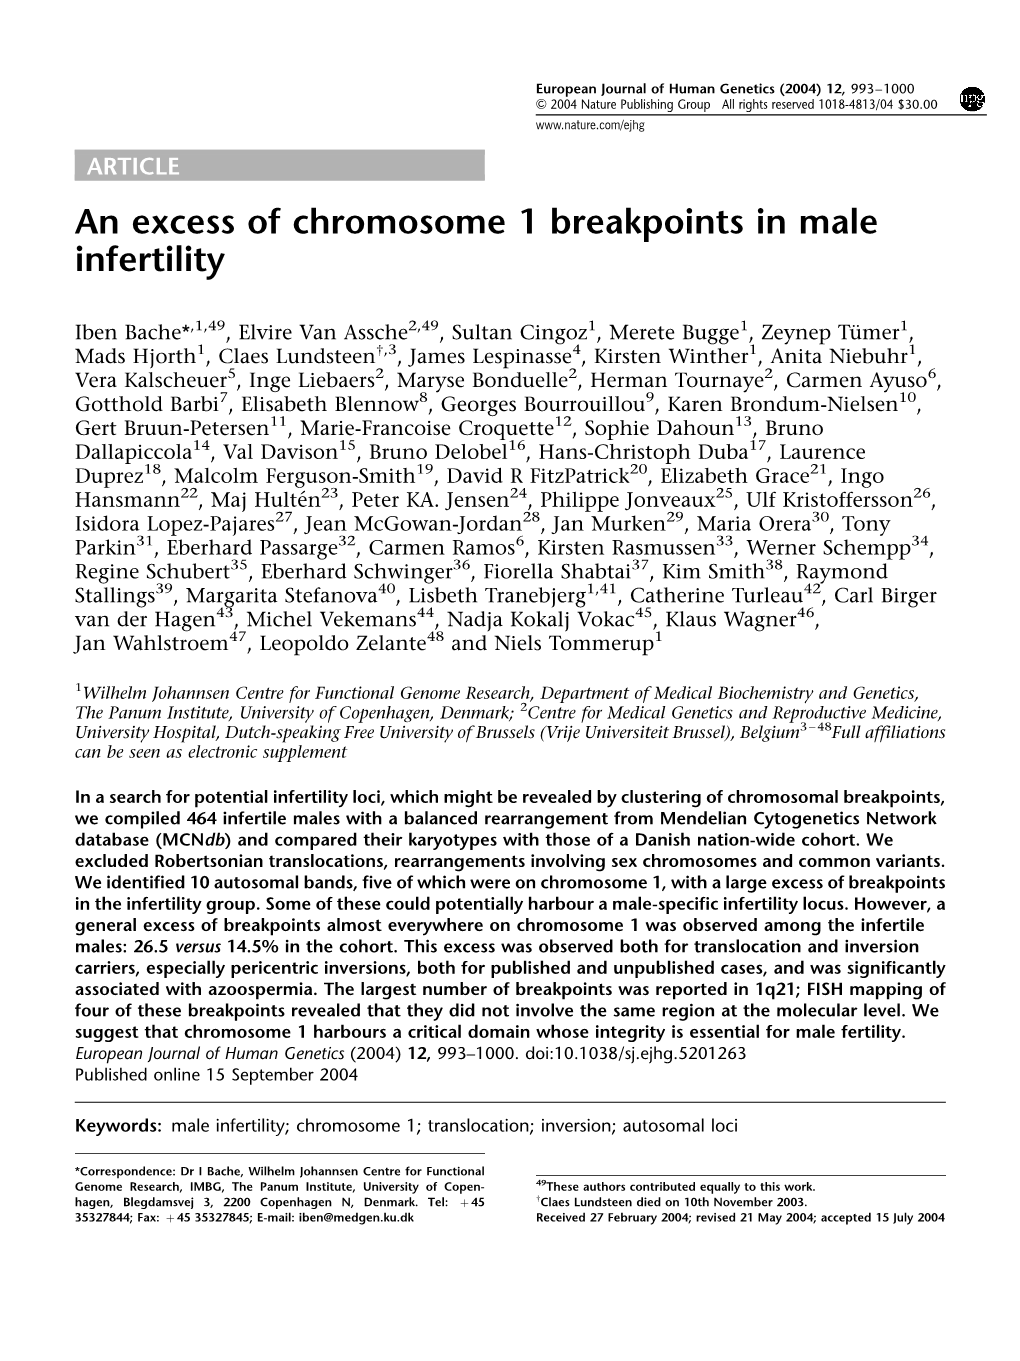 An Excess of Chromosome 1 Breakpoints in Male Infertility